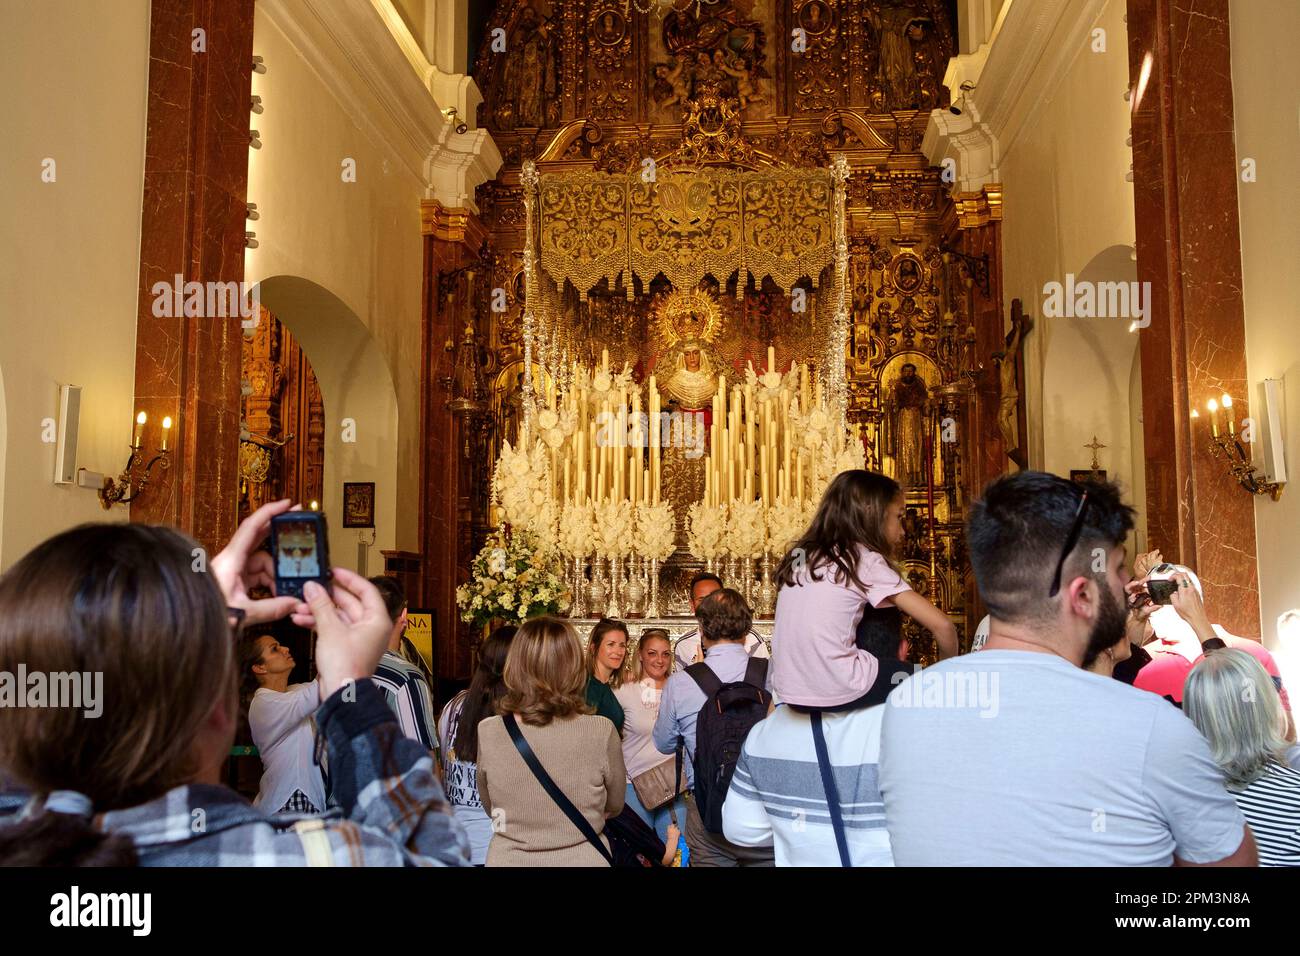 Seville Spain - Visitors to a church in Seville to view the A Paso. (It is an elaborate float made for religious processions). Seville Stock Photo